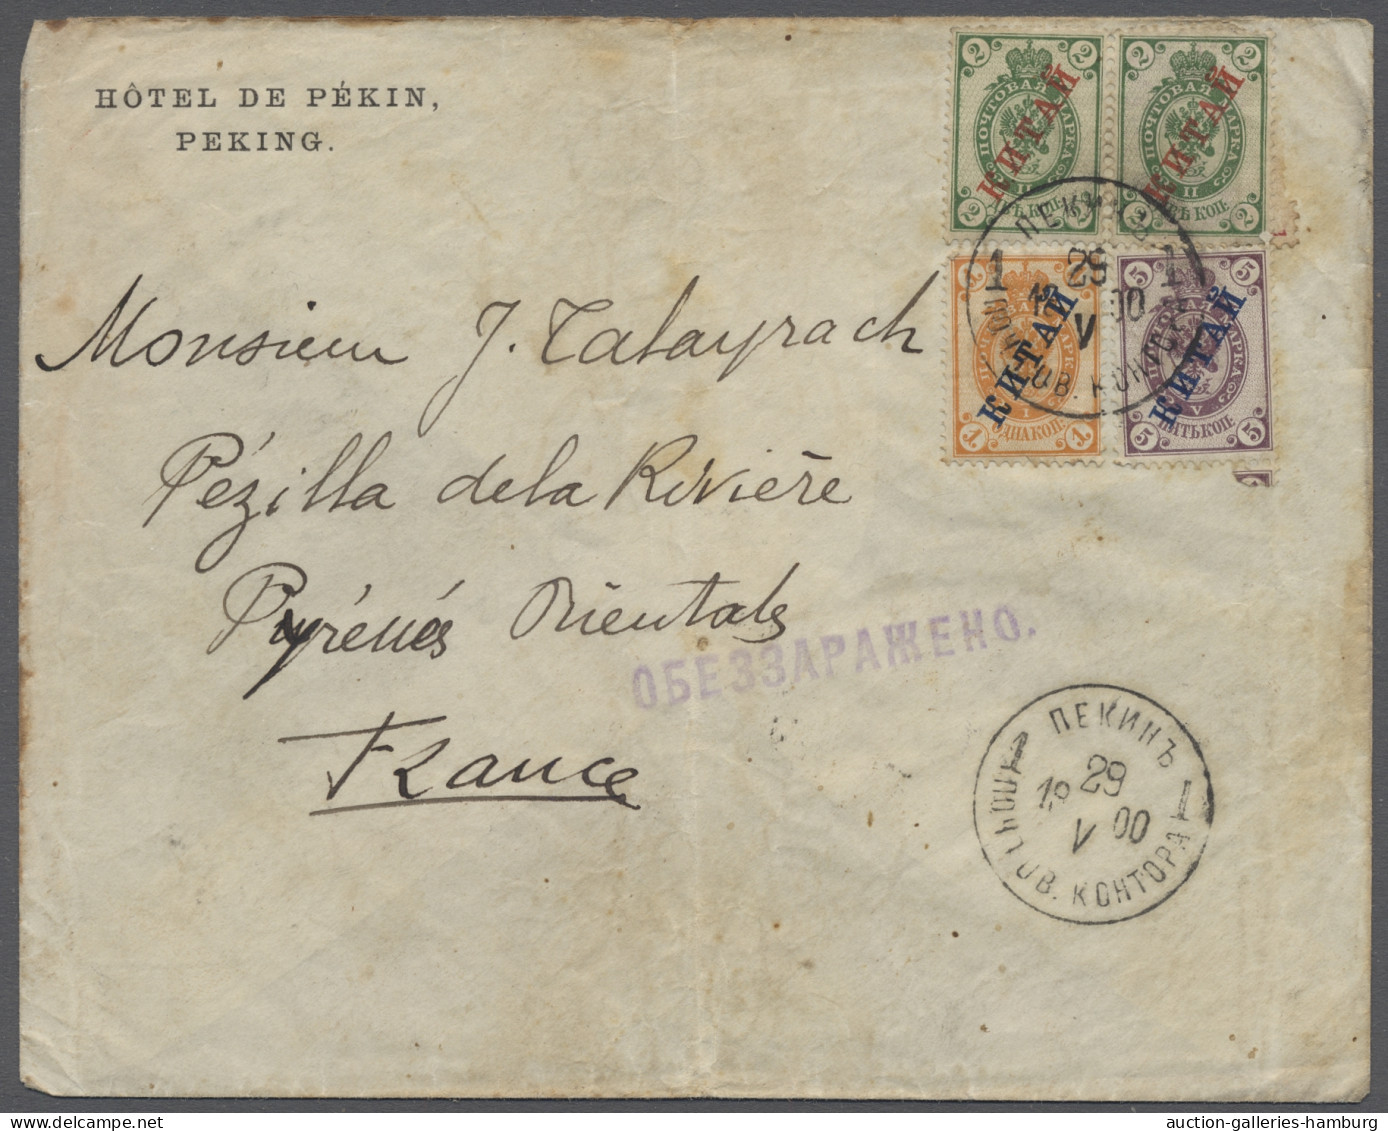 Russian Post In China: 1900, May 29, Letter Originating From PEKING Bearing Over - China